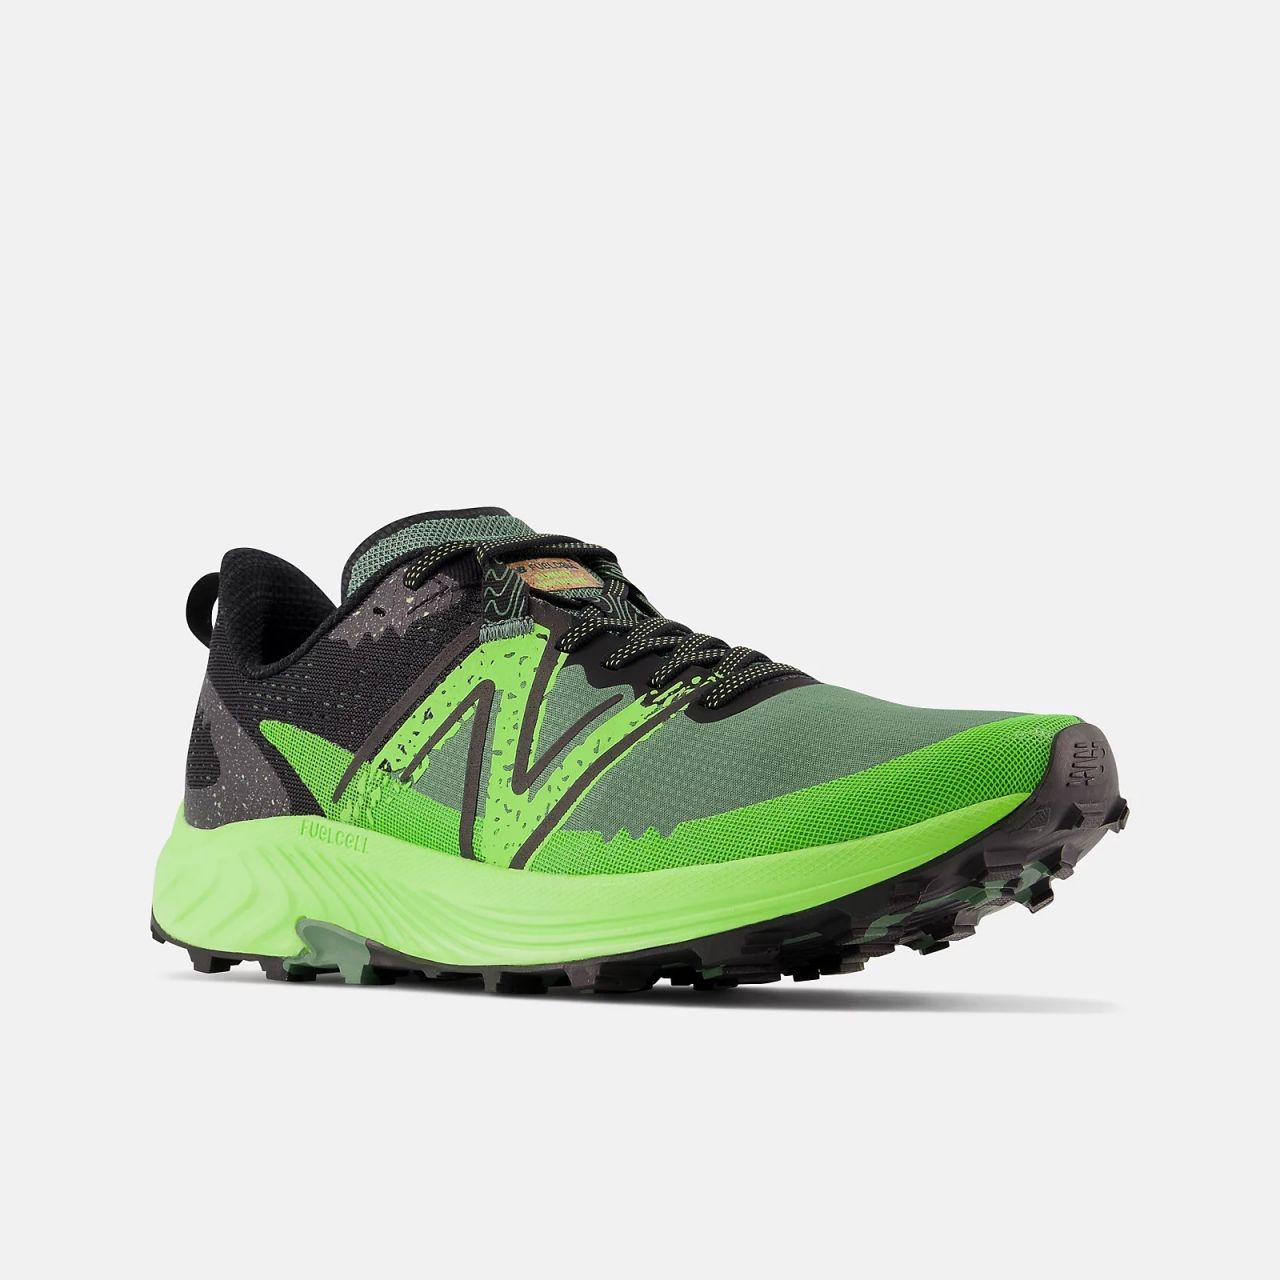 NEW BALANCE FUELCELL SUMMIT UNKNOWN V3 JADE ET BLACK chaussure de trail